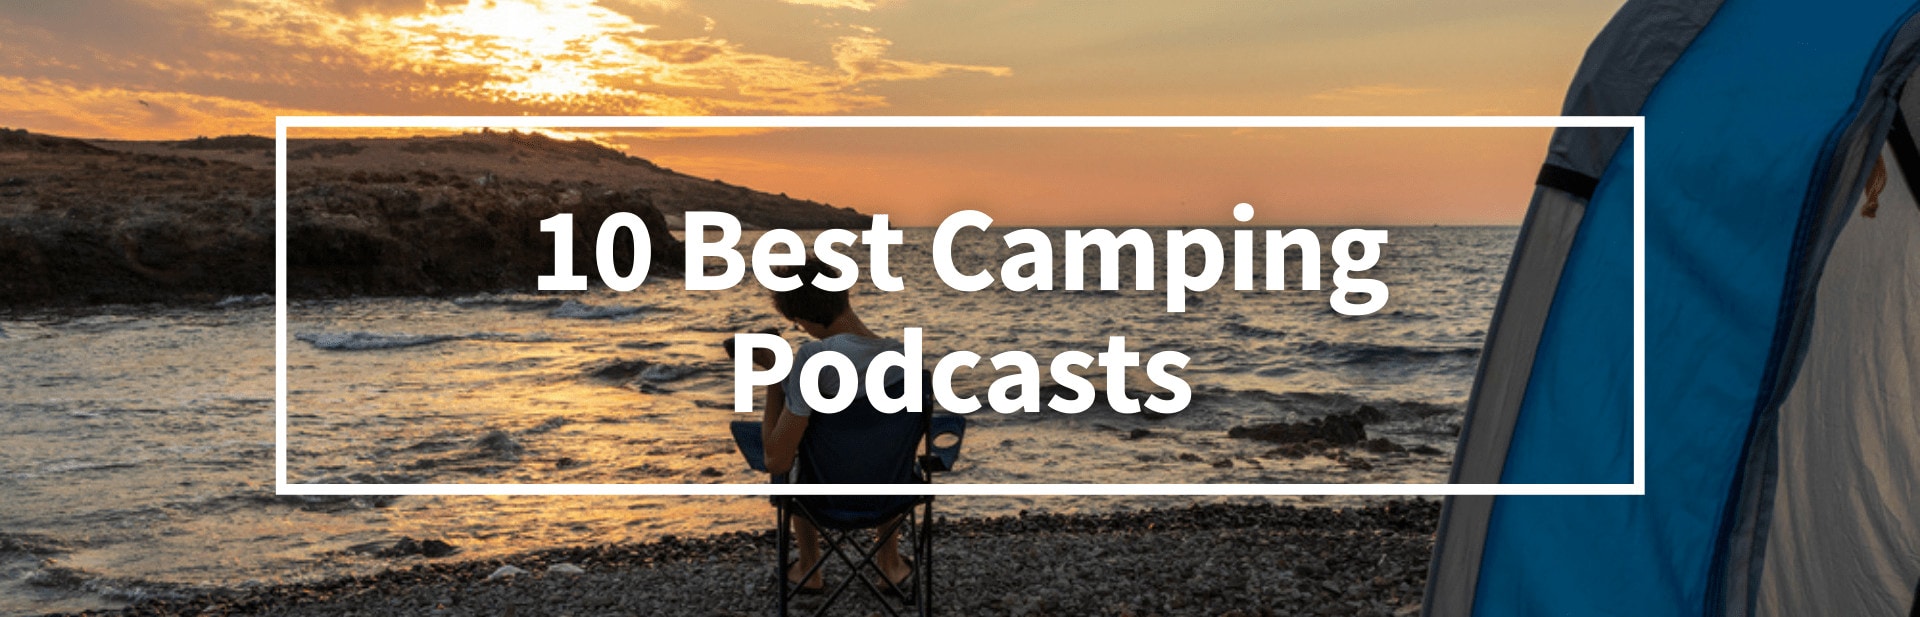 Ten Best Camping Podcasts